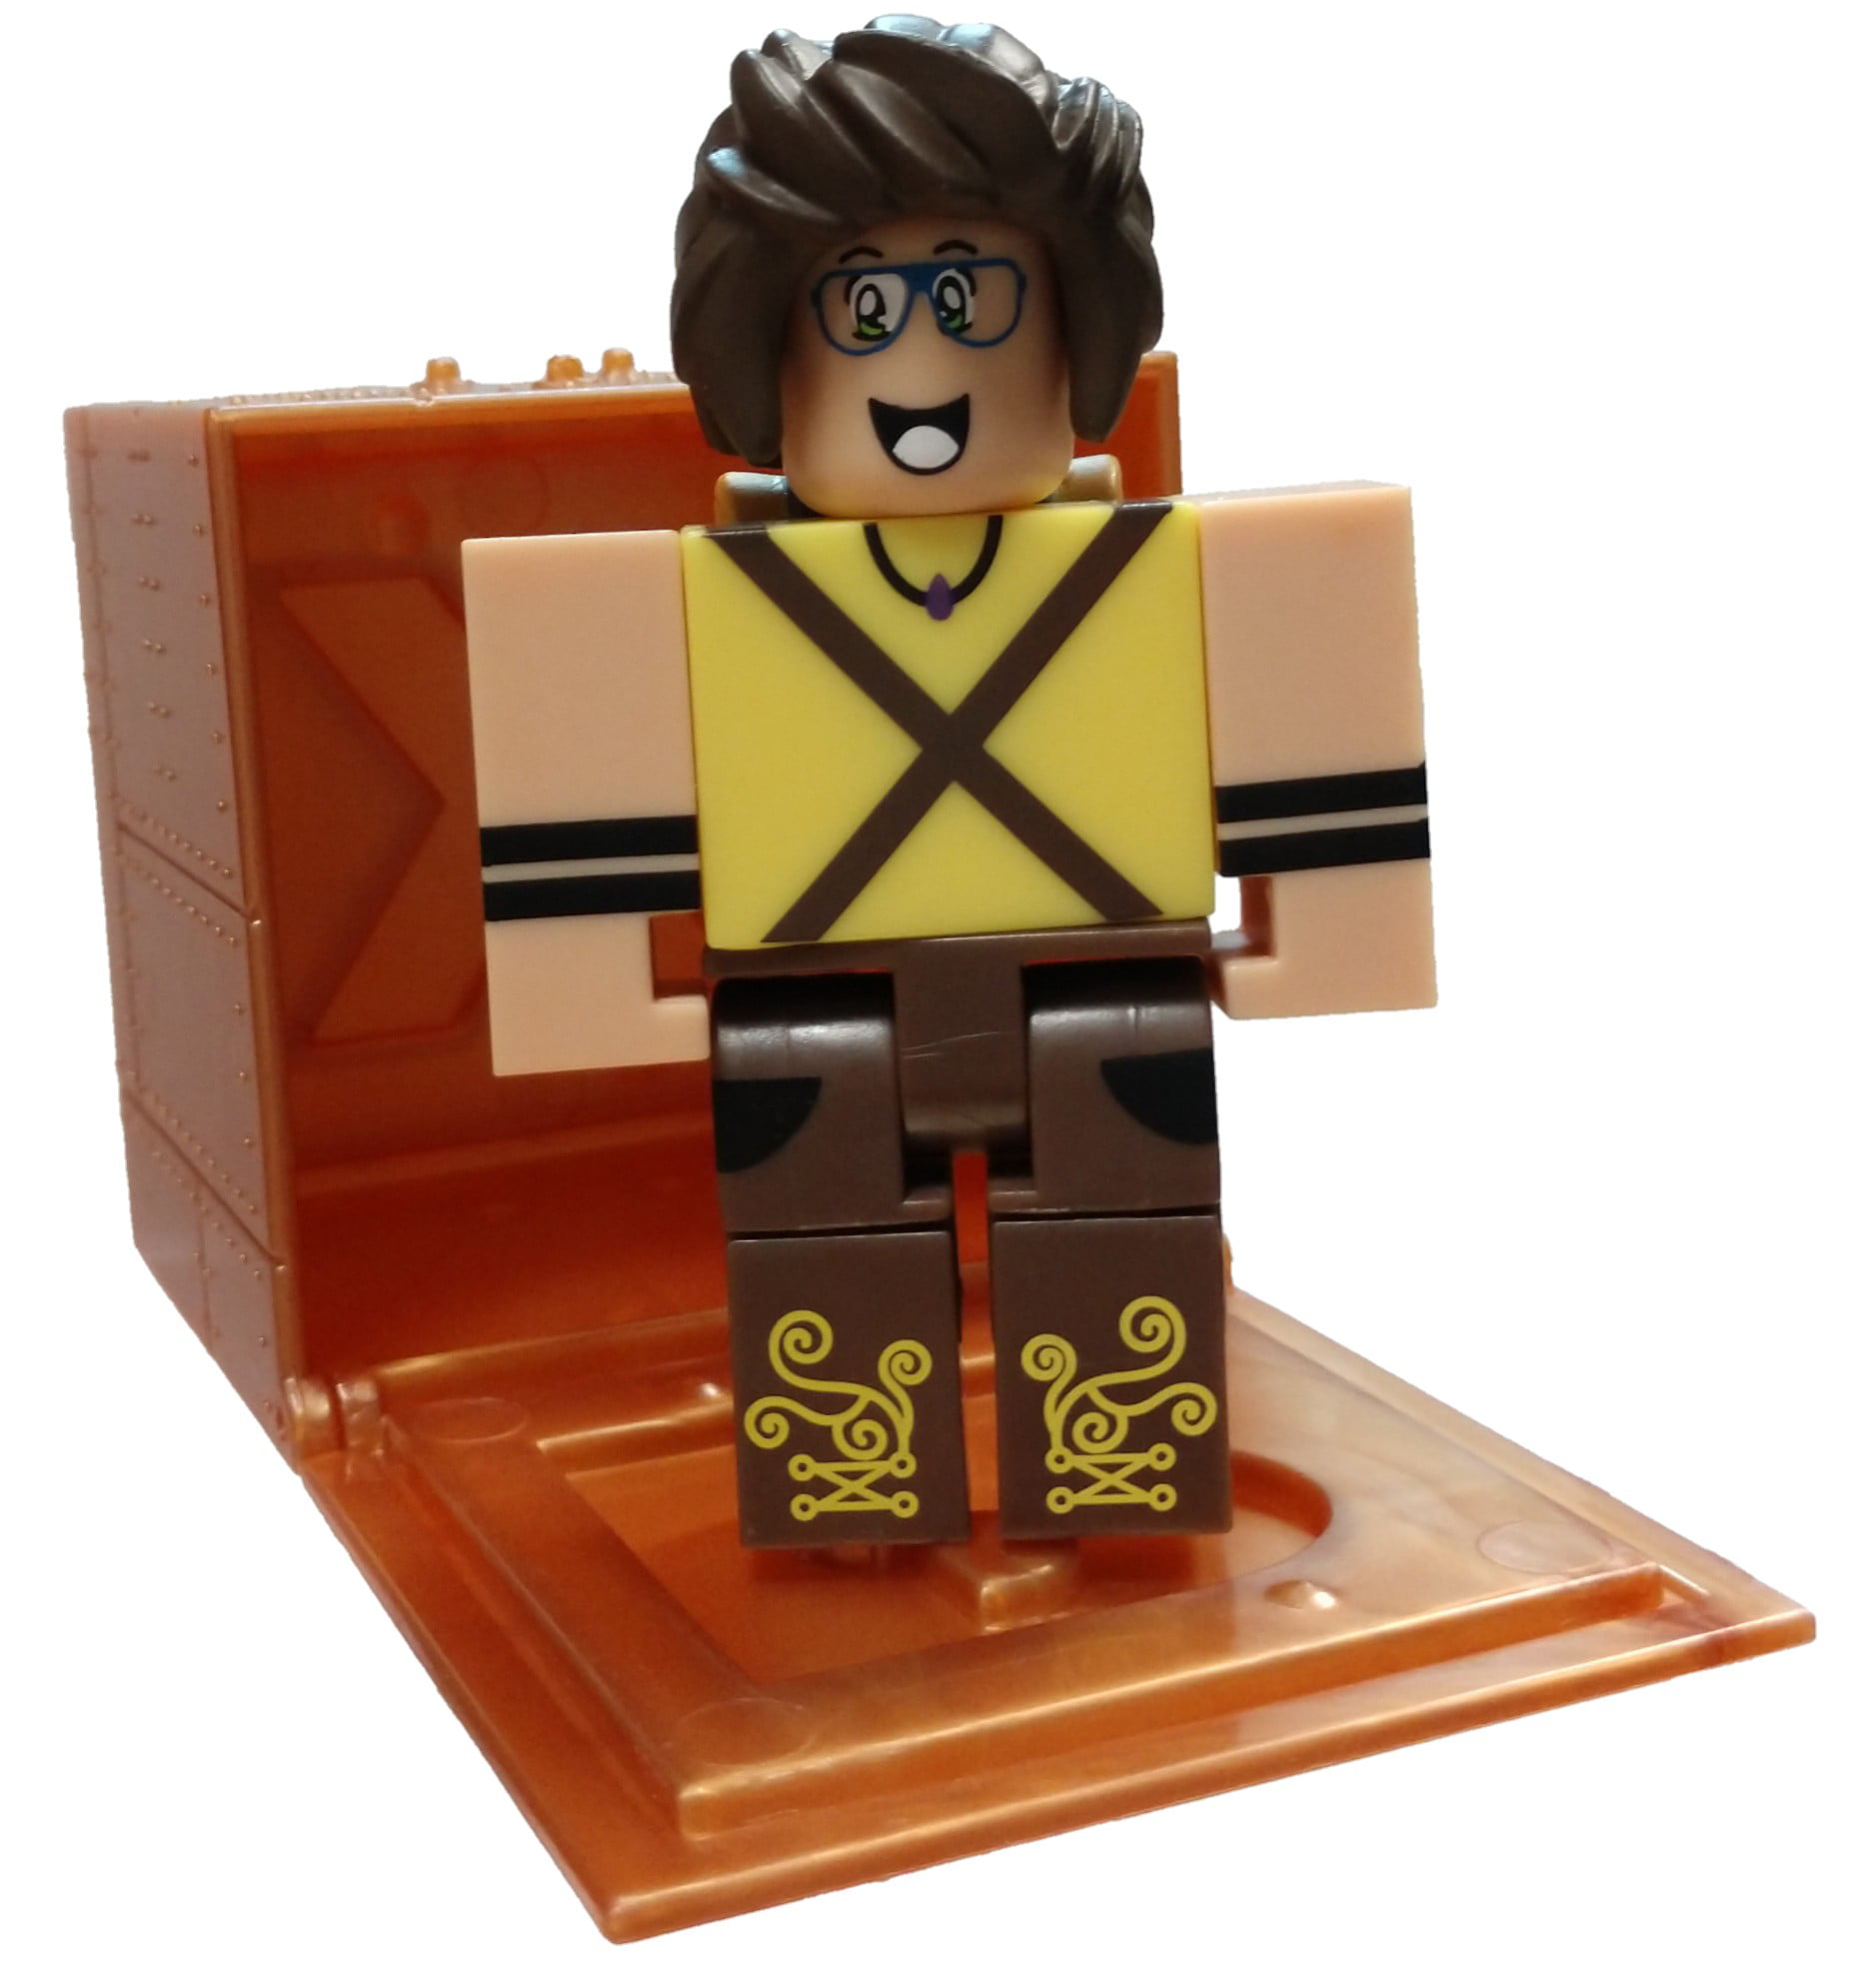 Roblox Series 8 Ghost Simulator Dylan Mini Figure With Cube And Online Code No Packaging Walmart Com Walmart Com - exercise simulator roblox